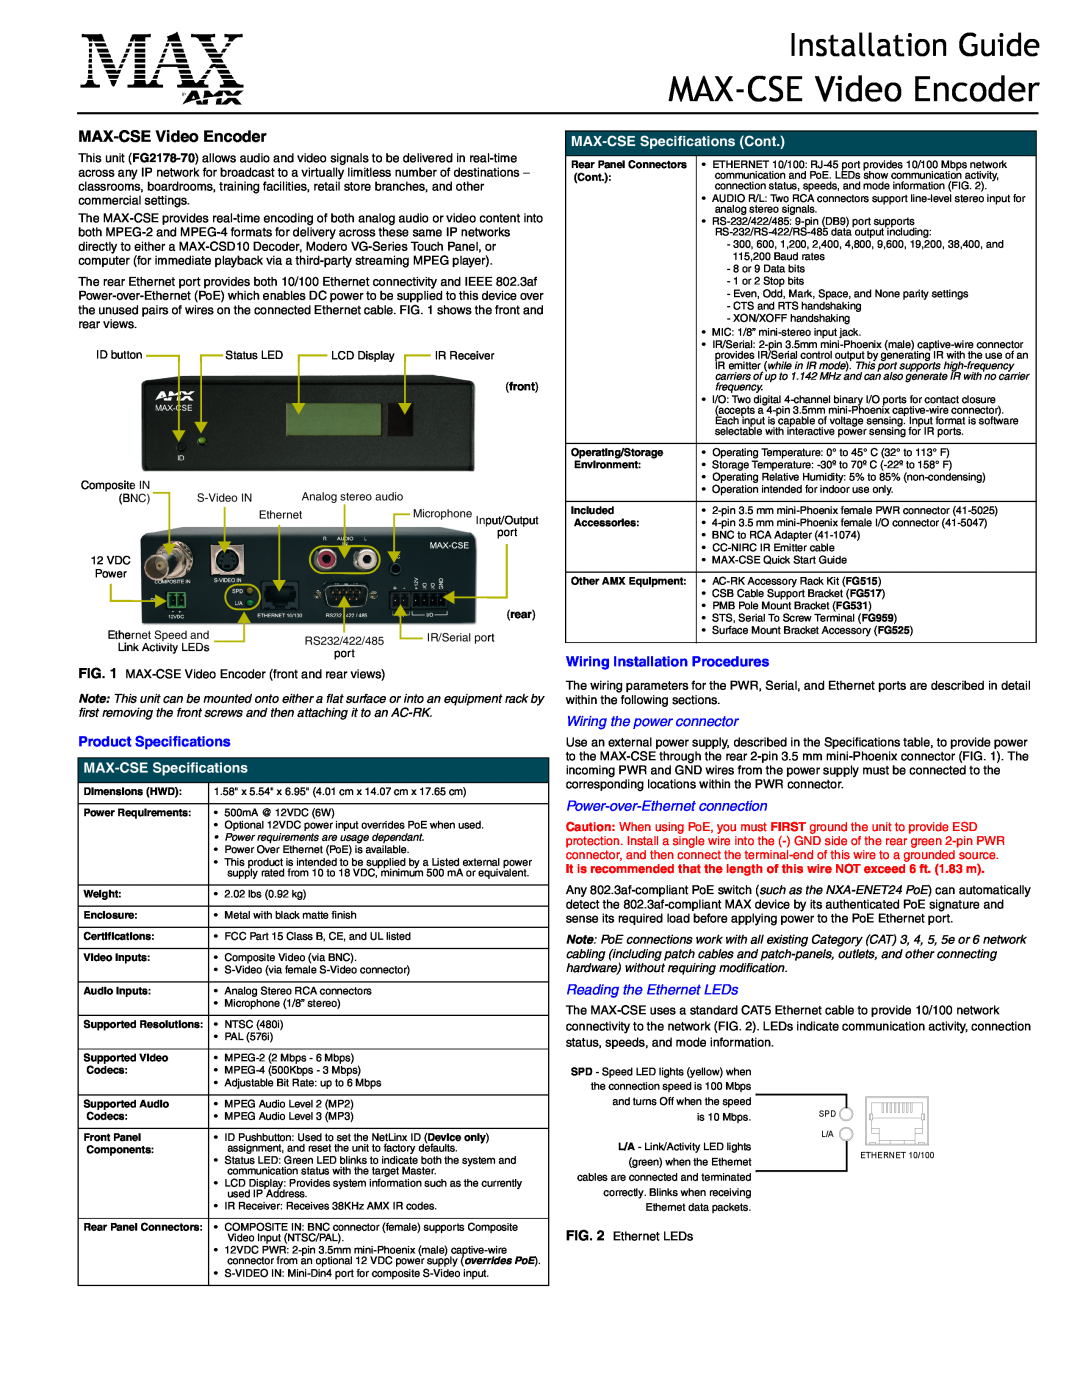 AMX manual MAX-CSE/MAX-CSD10, Operation/Reference Guide, MAX Video Encoder & Video Decoder, MAX by AMX 